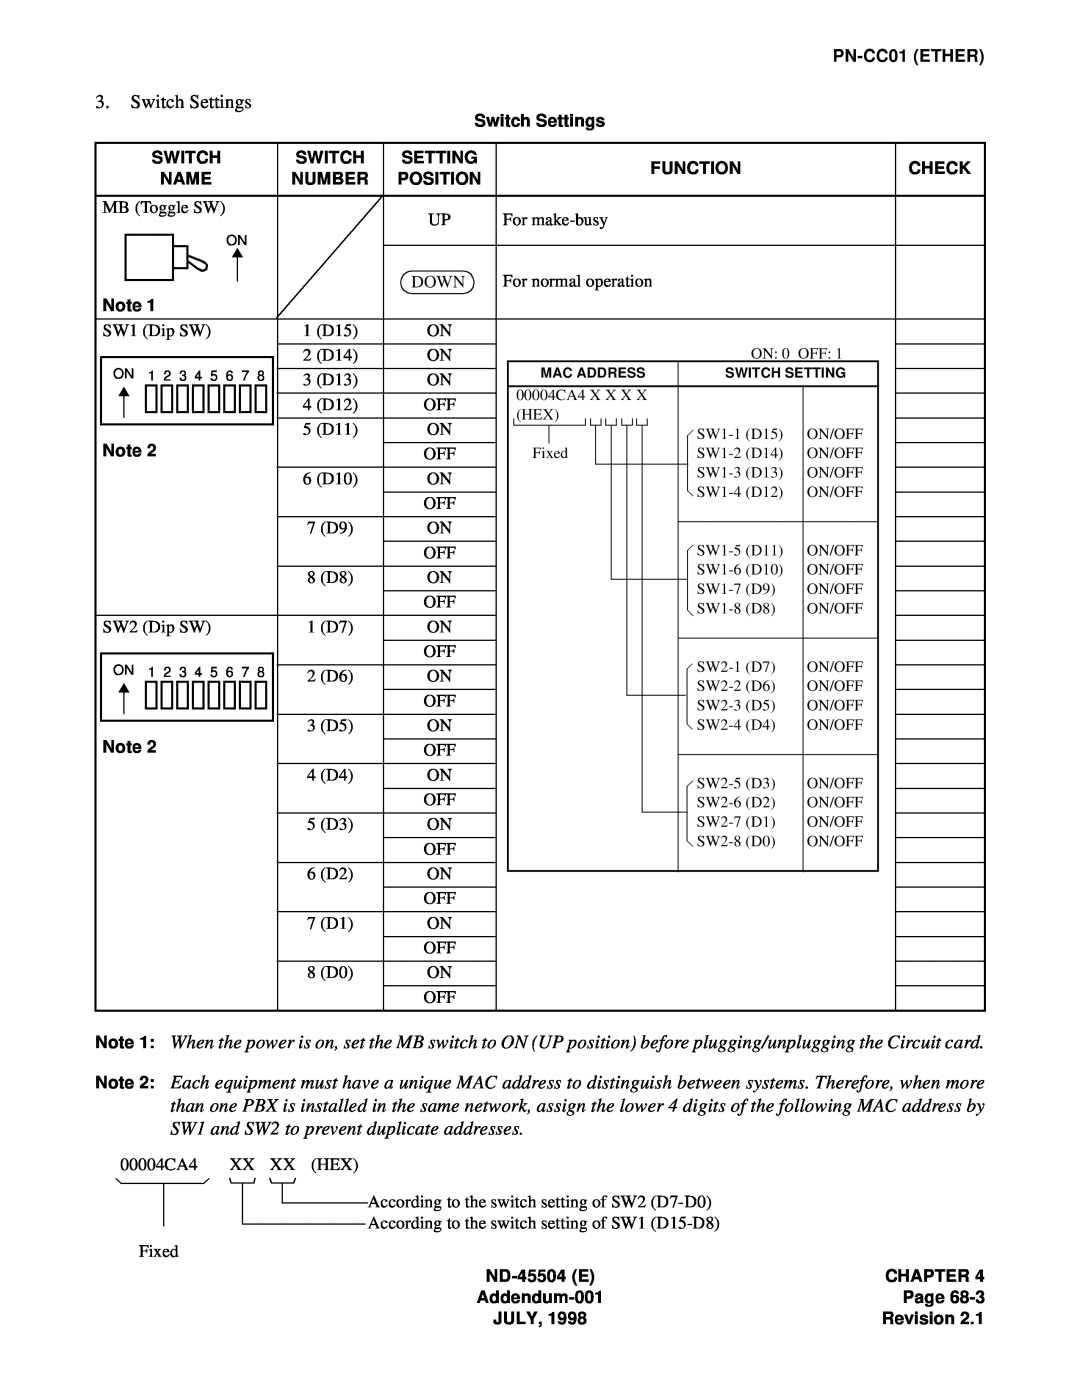 NEC 2000 IVS manual 00004CA4 XX XX HEX, According to the switch setting of SW2 D7-D0, Fixed 